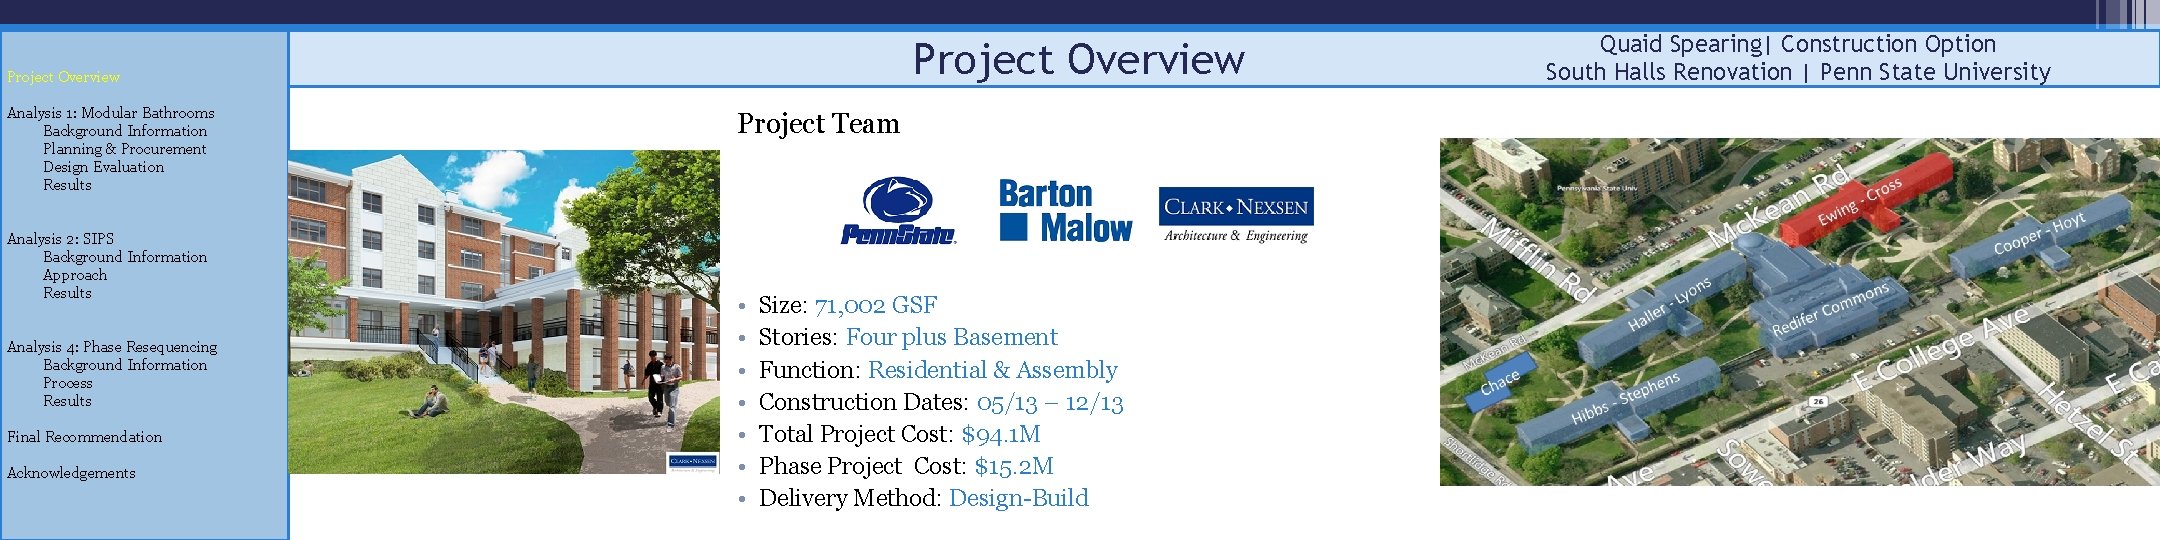 Project Overview Analysis 1: Modular Bathrooms Background Information Planning & Procurement Design Evaluation Results